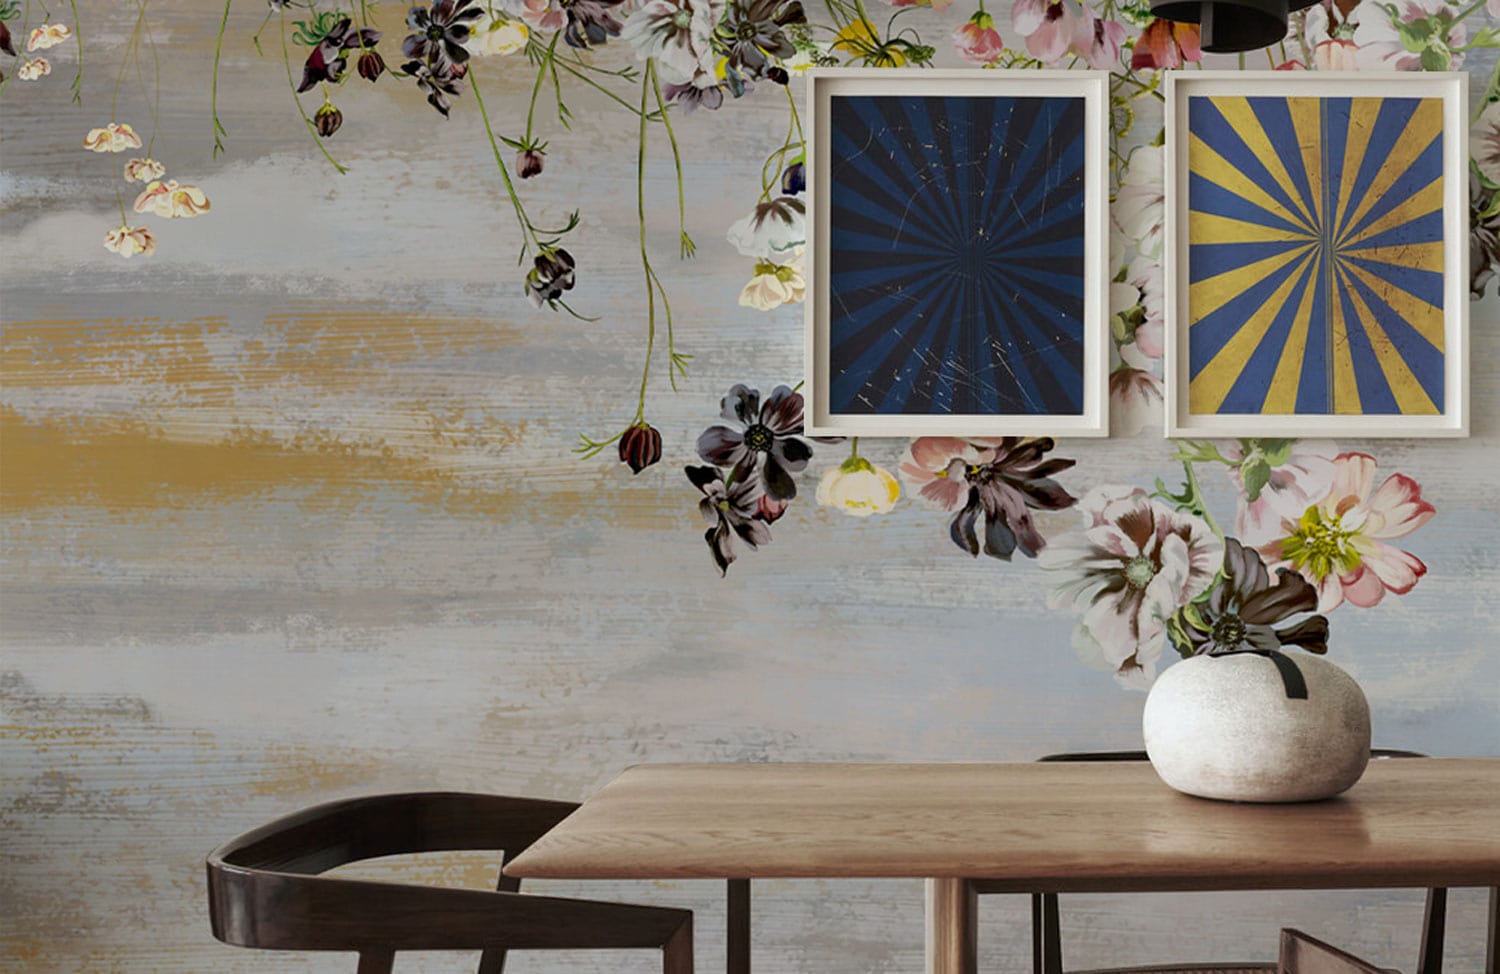 décor of your choice using a floral wallpaper mural in the dining room